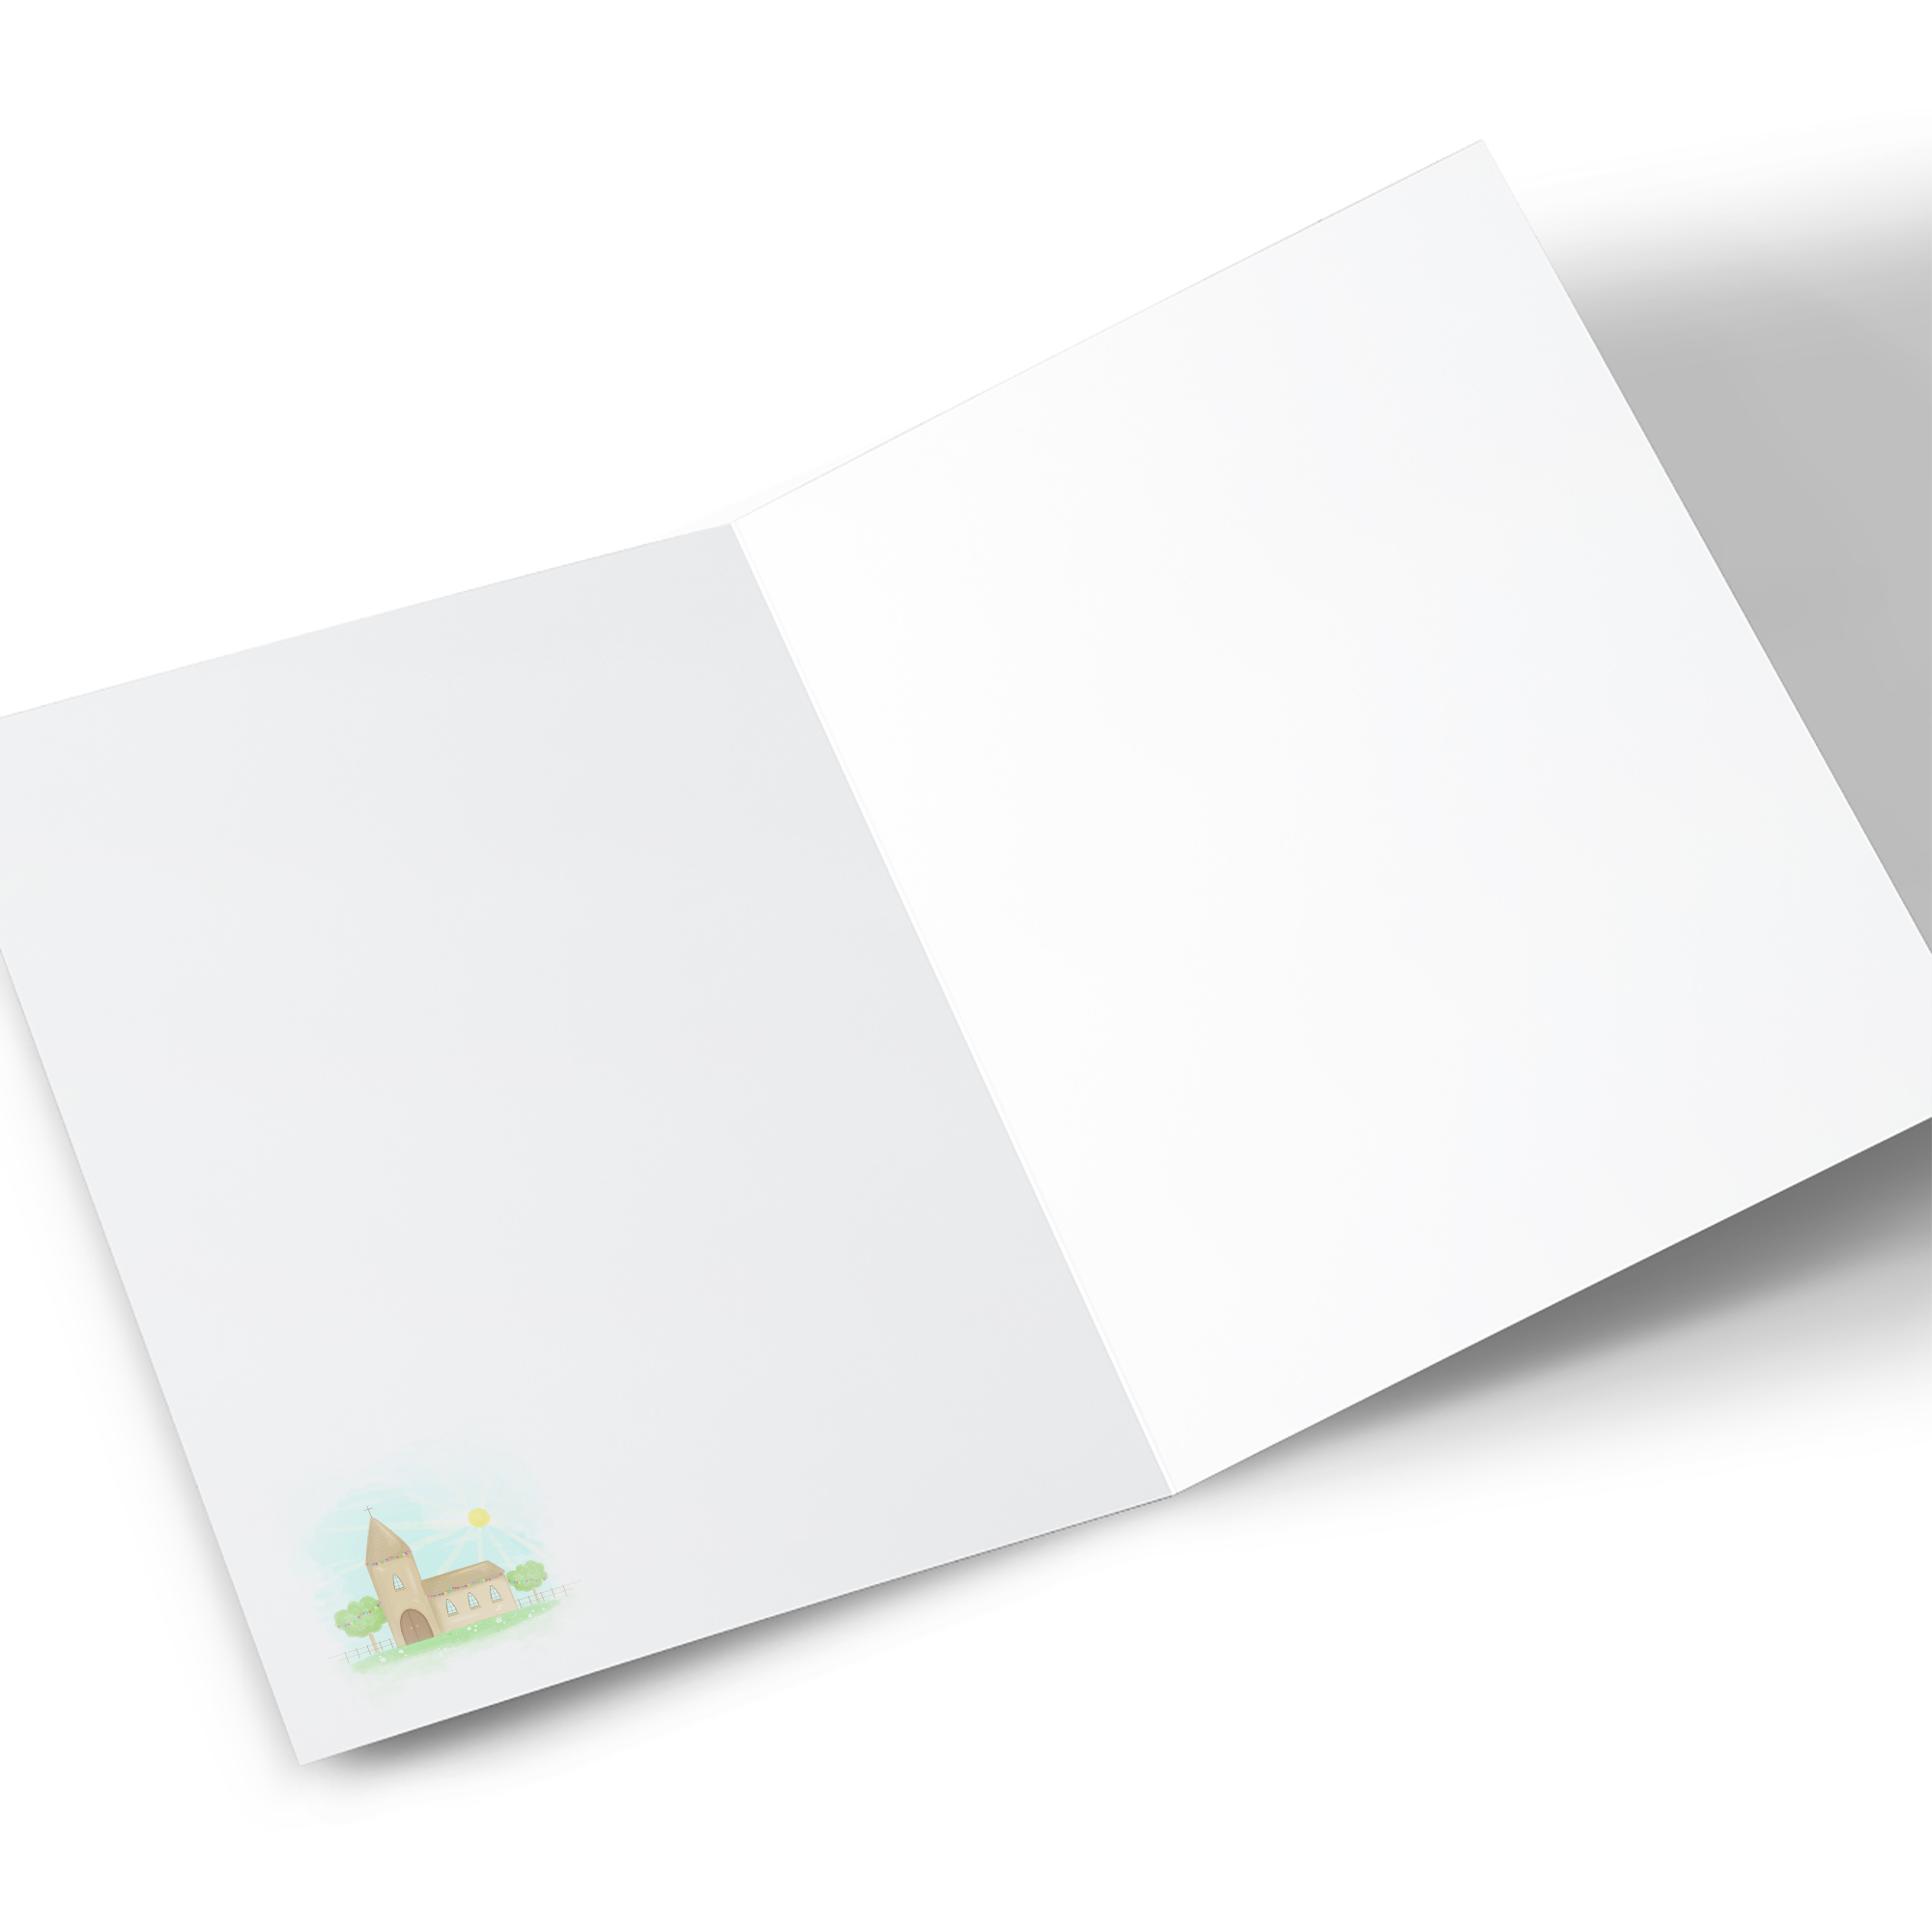 Congratulations On Your Communion Card Printable Free